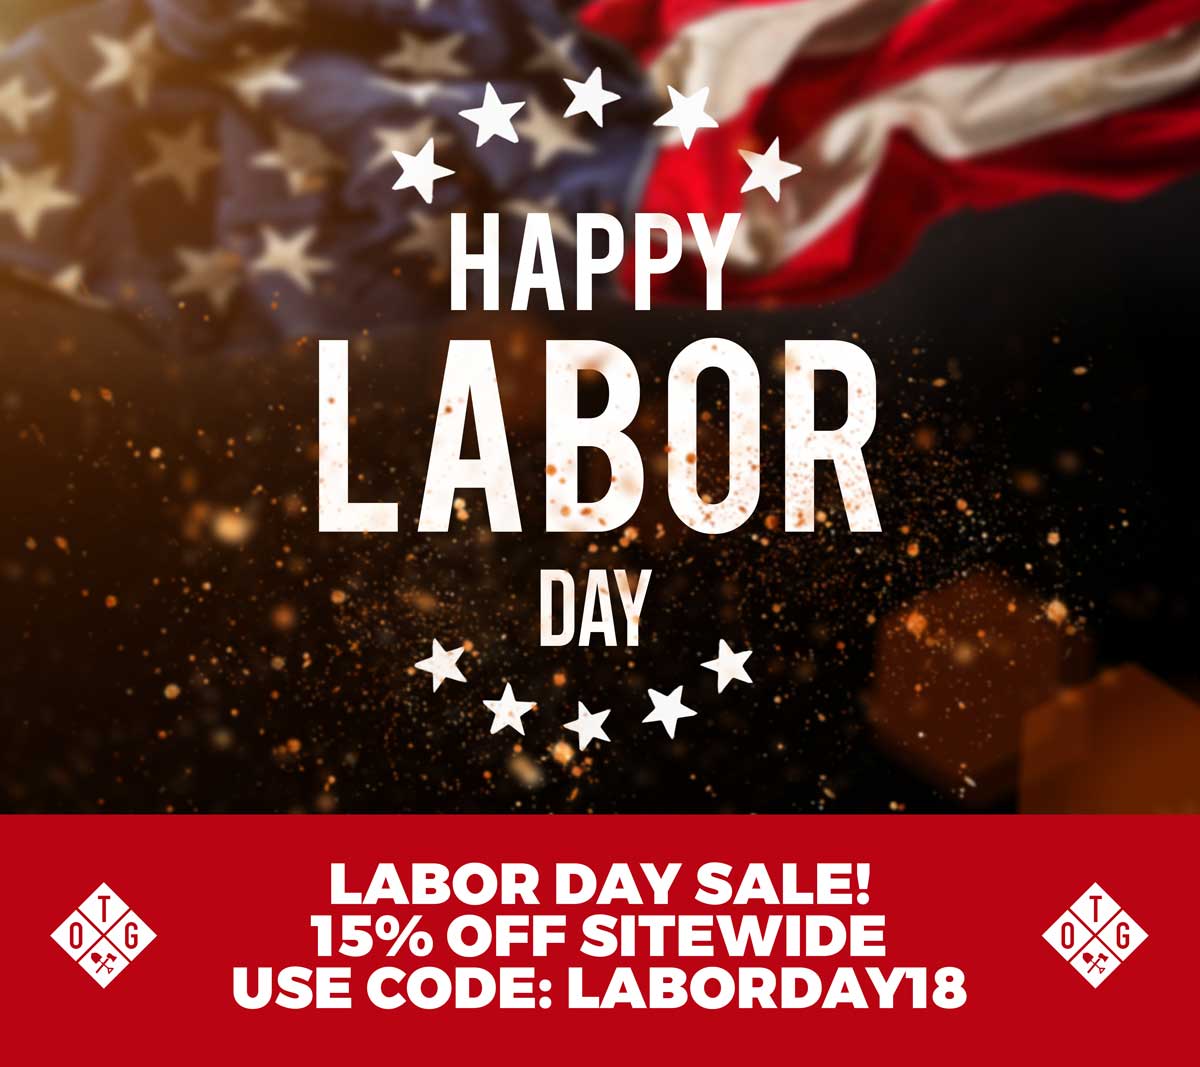 Labor Day Sale 15% Off Sitewide